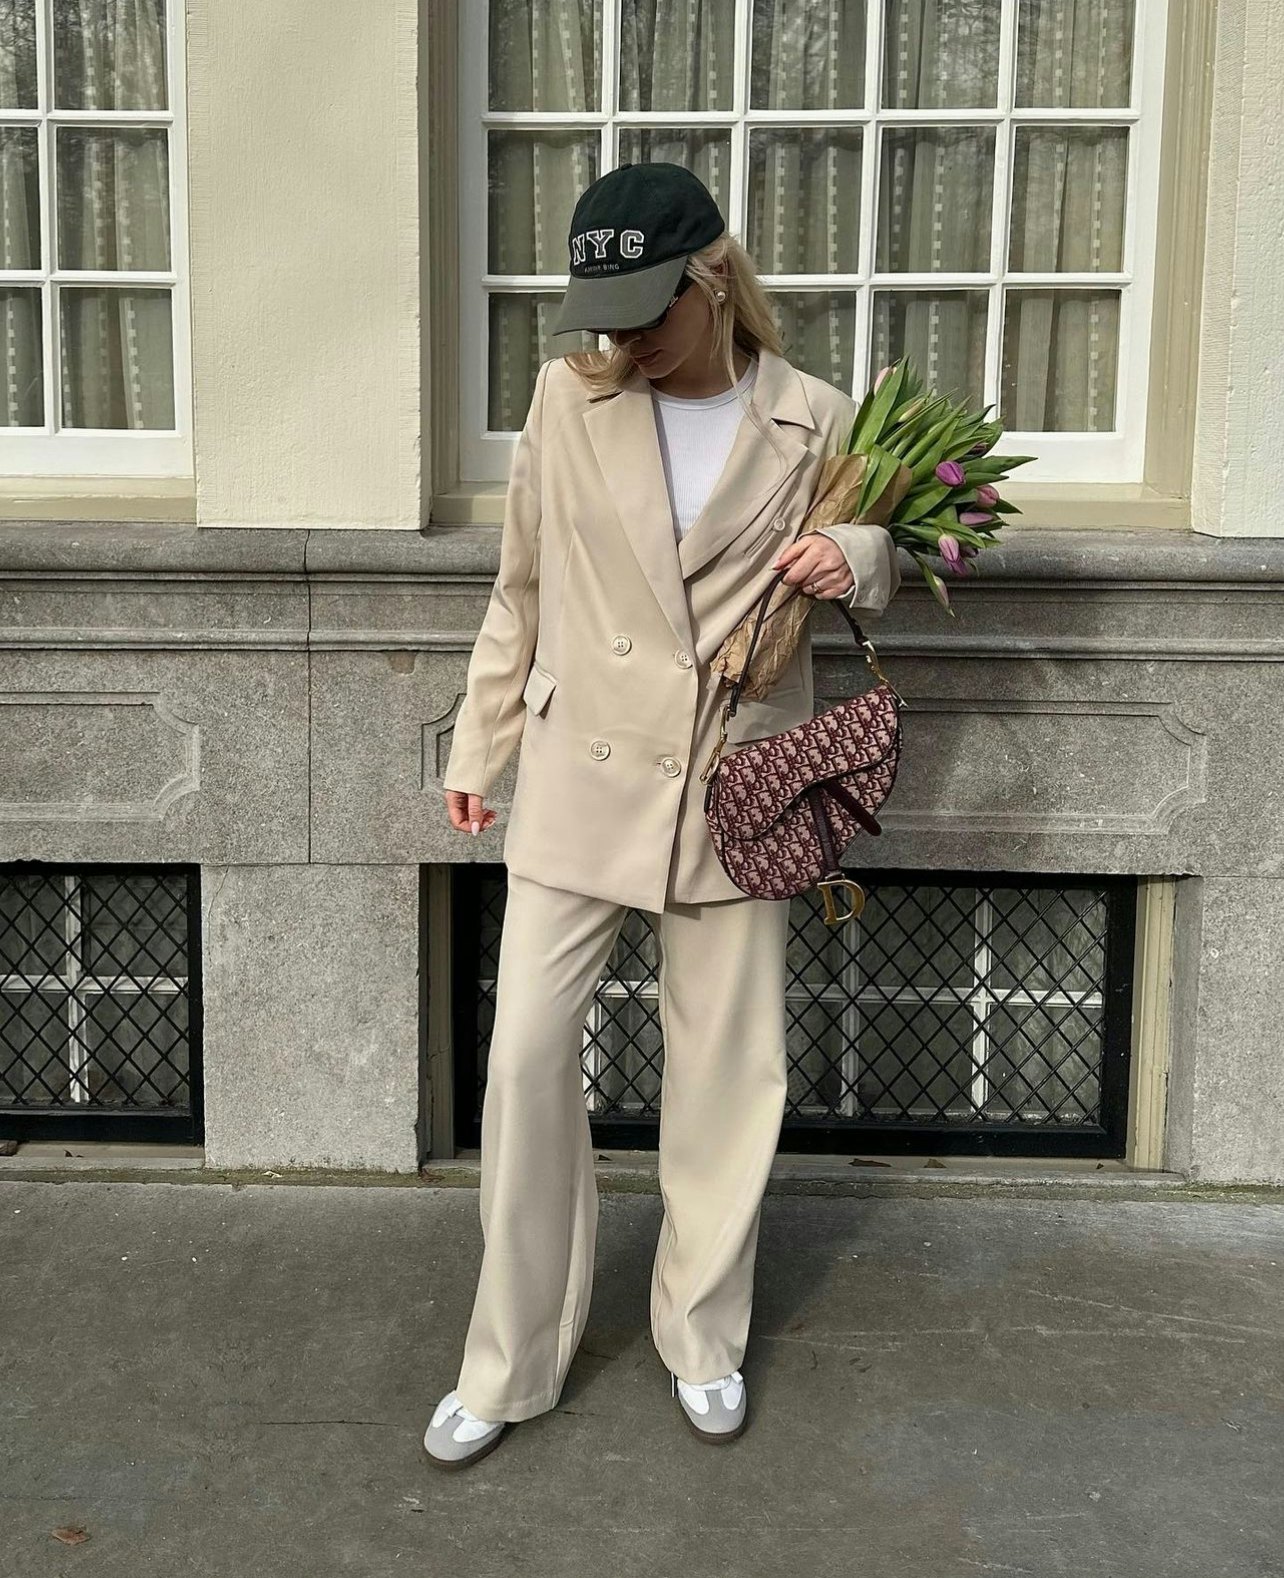 How To Wear Sneakers With Trousers In A Cool & Non-Commuter Way